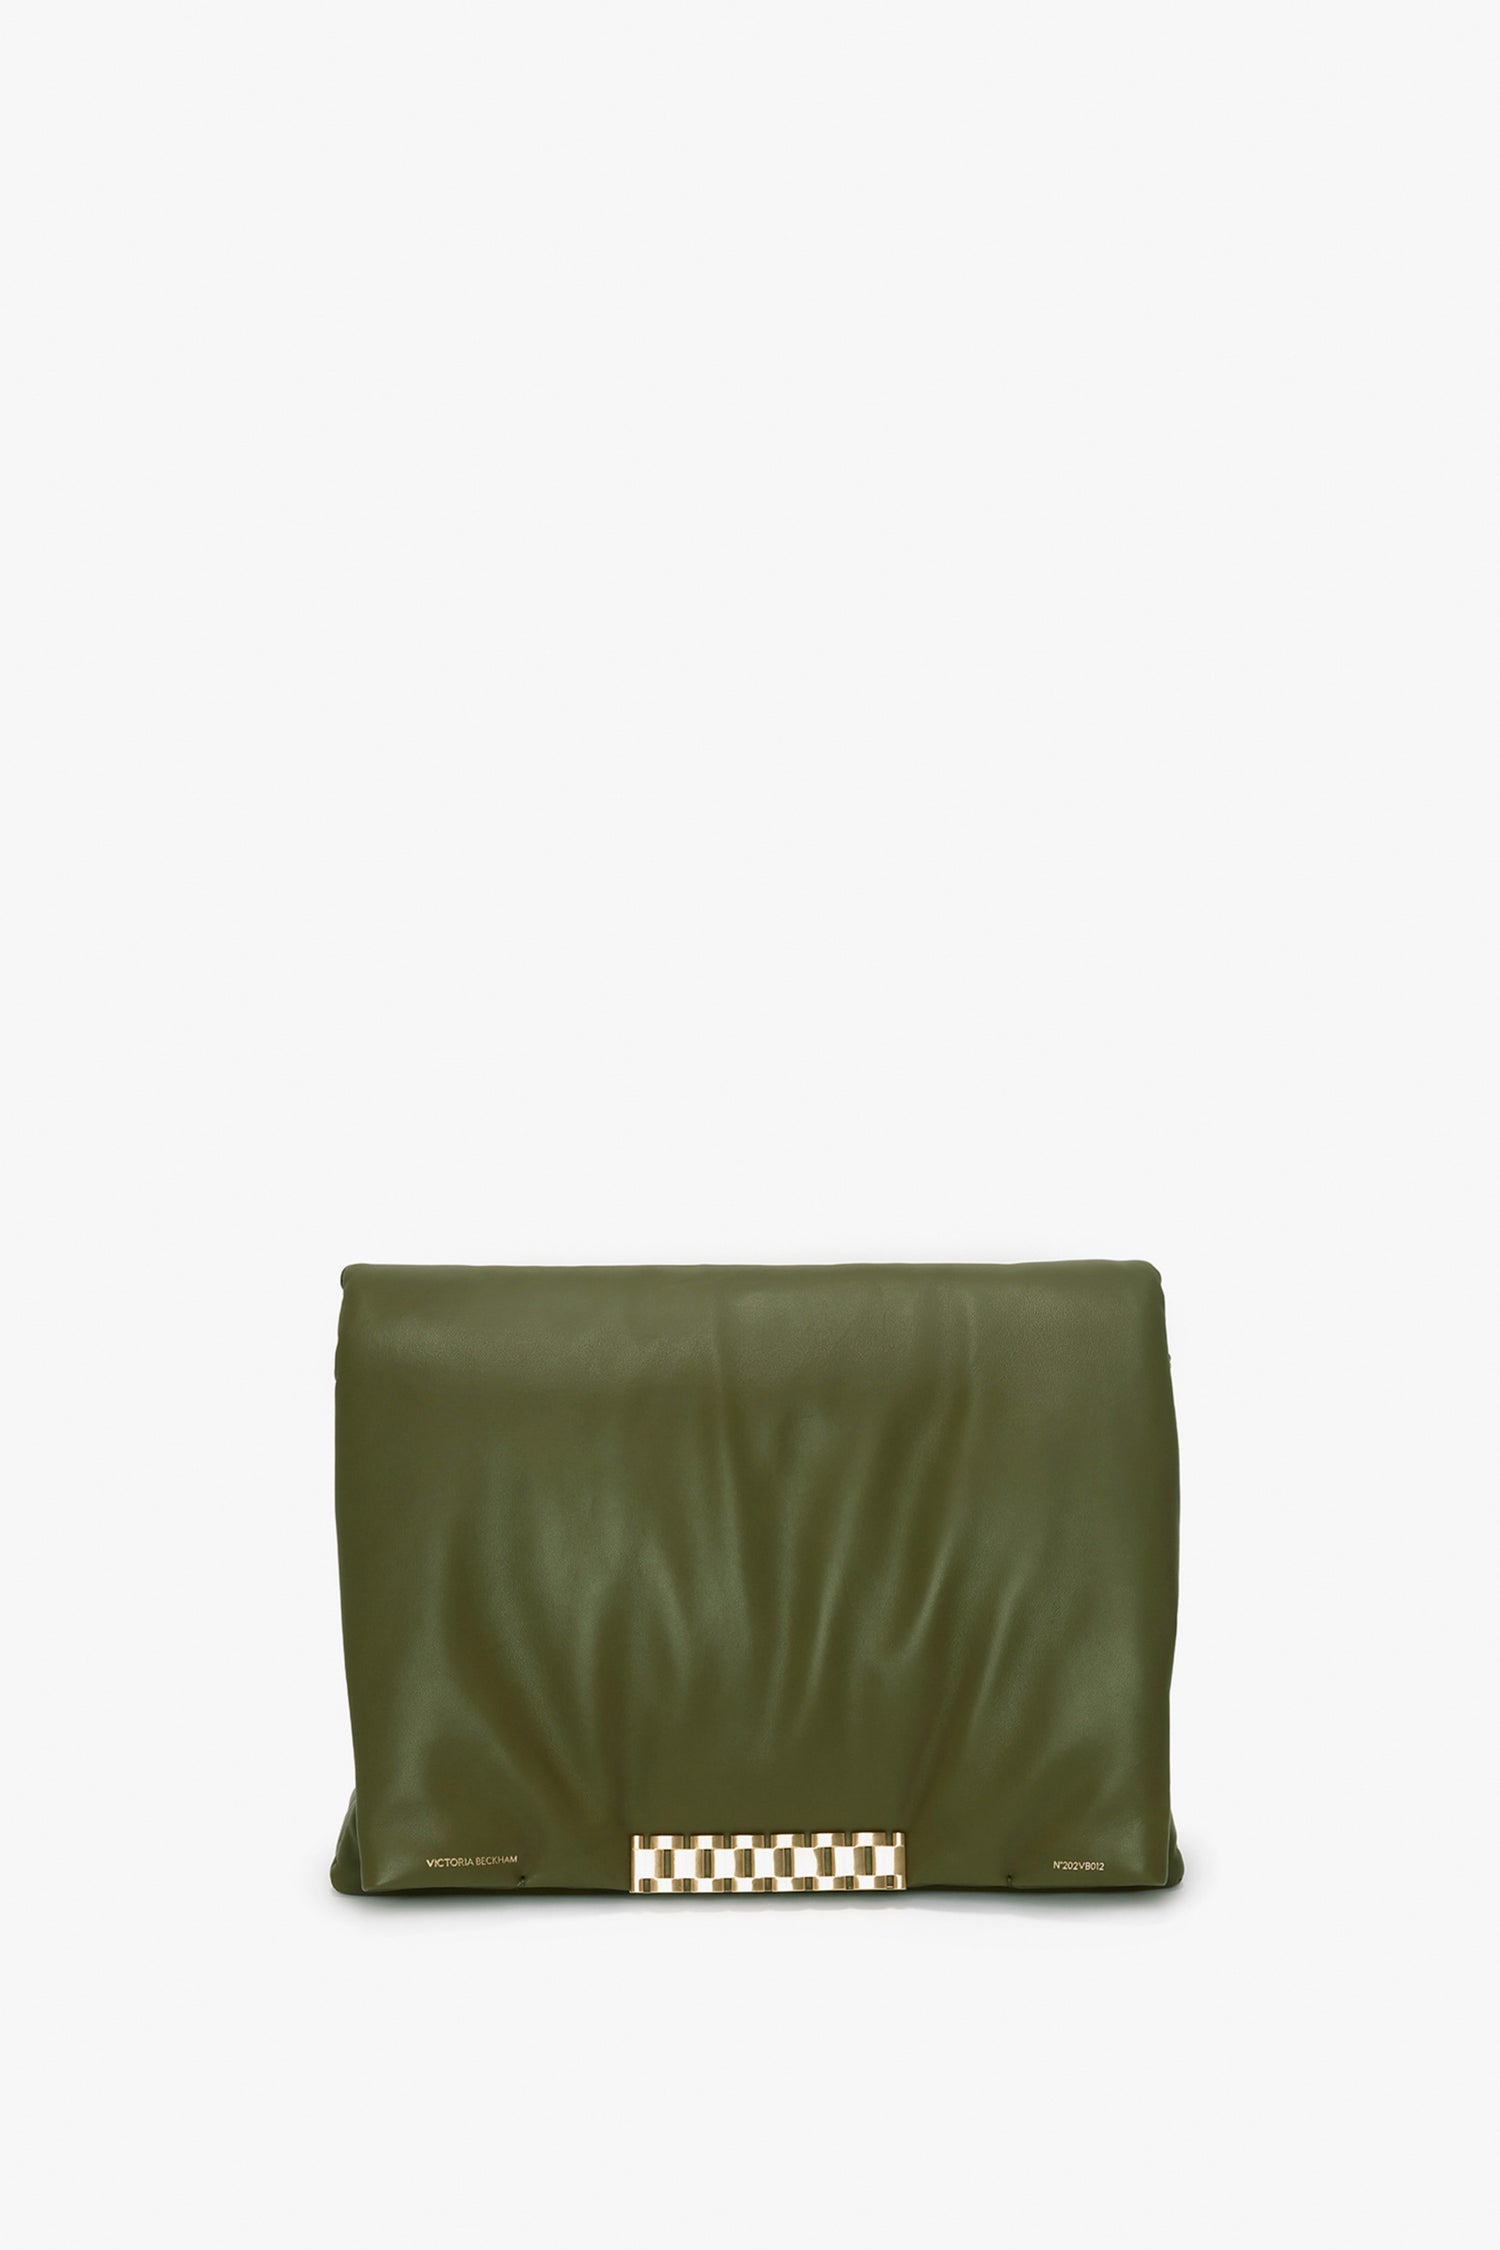 A **Puffy Jumbo Chain Pouch In Khaki Leather** crafted from sheepskin nappa leather with a rectangular woven gold and silver clasp is set against a plain white background. **Victoria Beckham**.